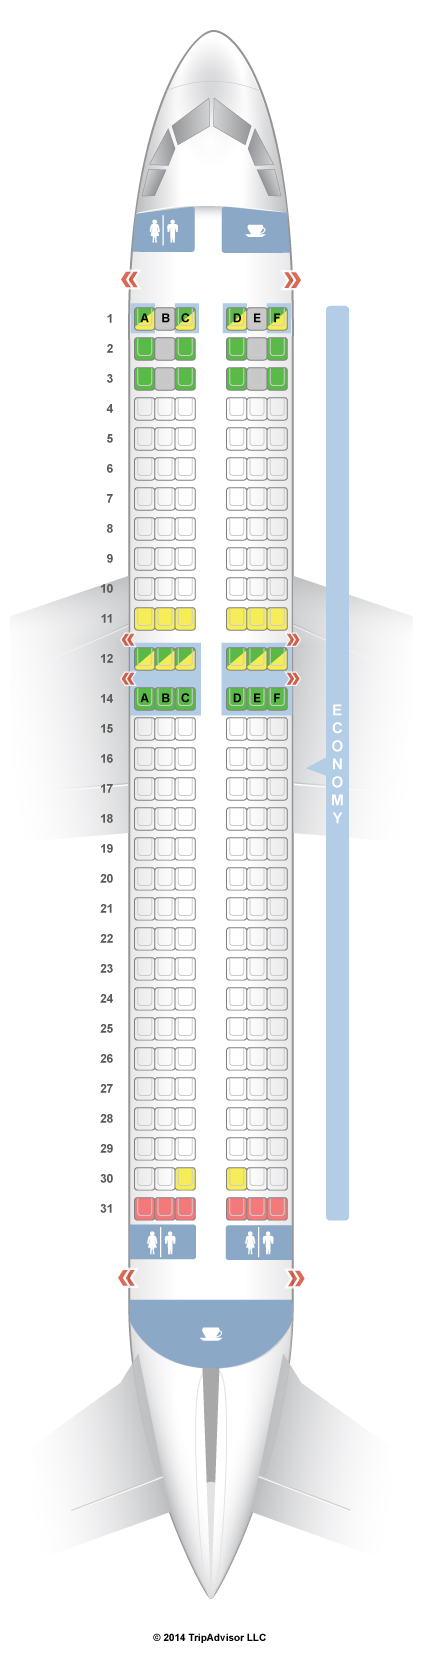 Alaska Airlines Seating Chart